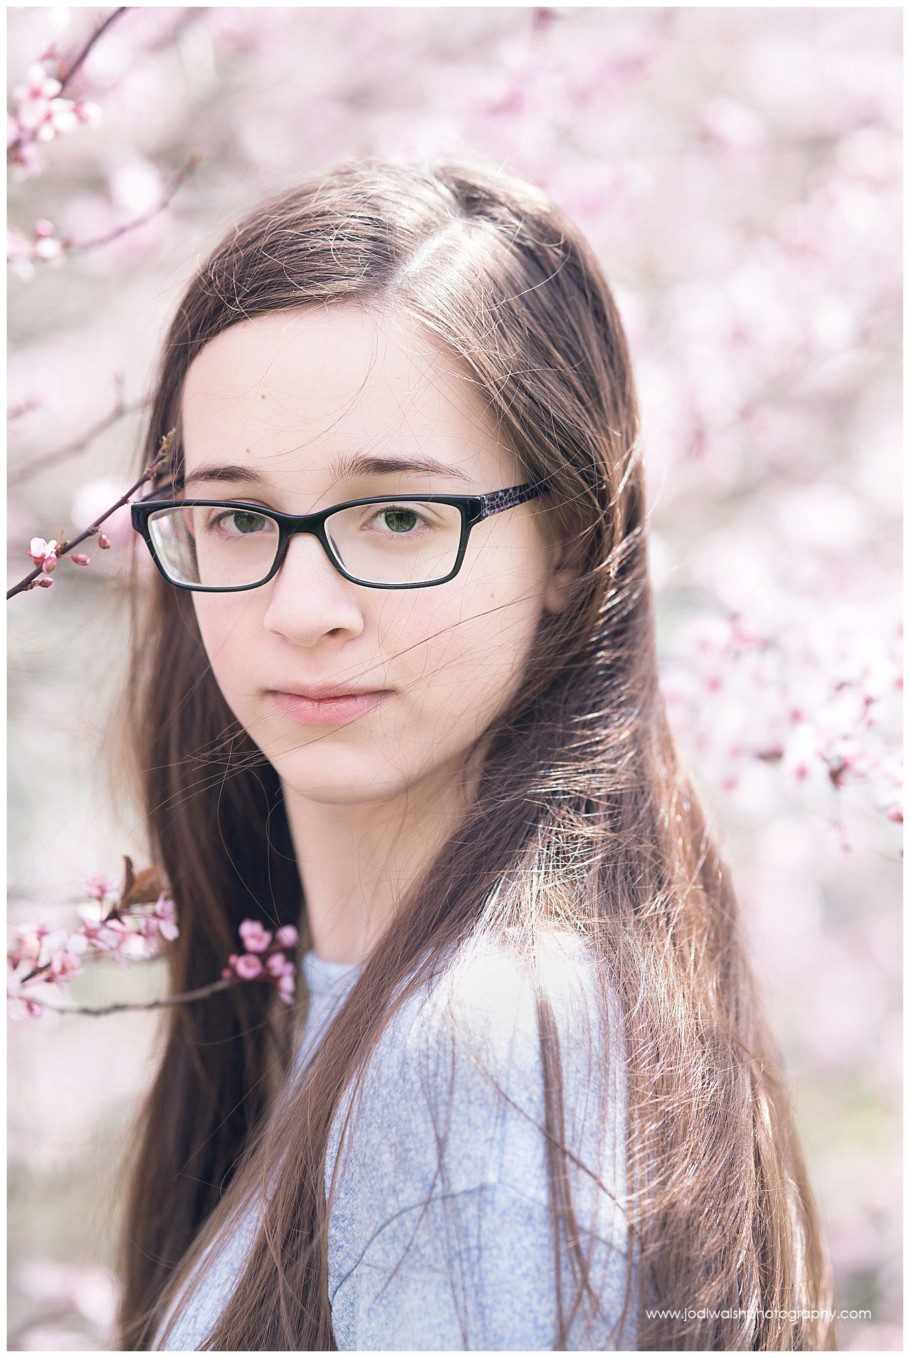 images of a teen girl standing near a tree with light pink blossoms. She's looking over her shoulder, wearing glasses and has a thoughtful expression